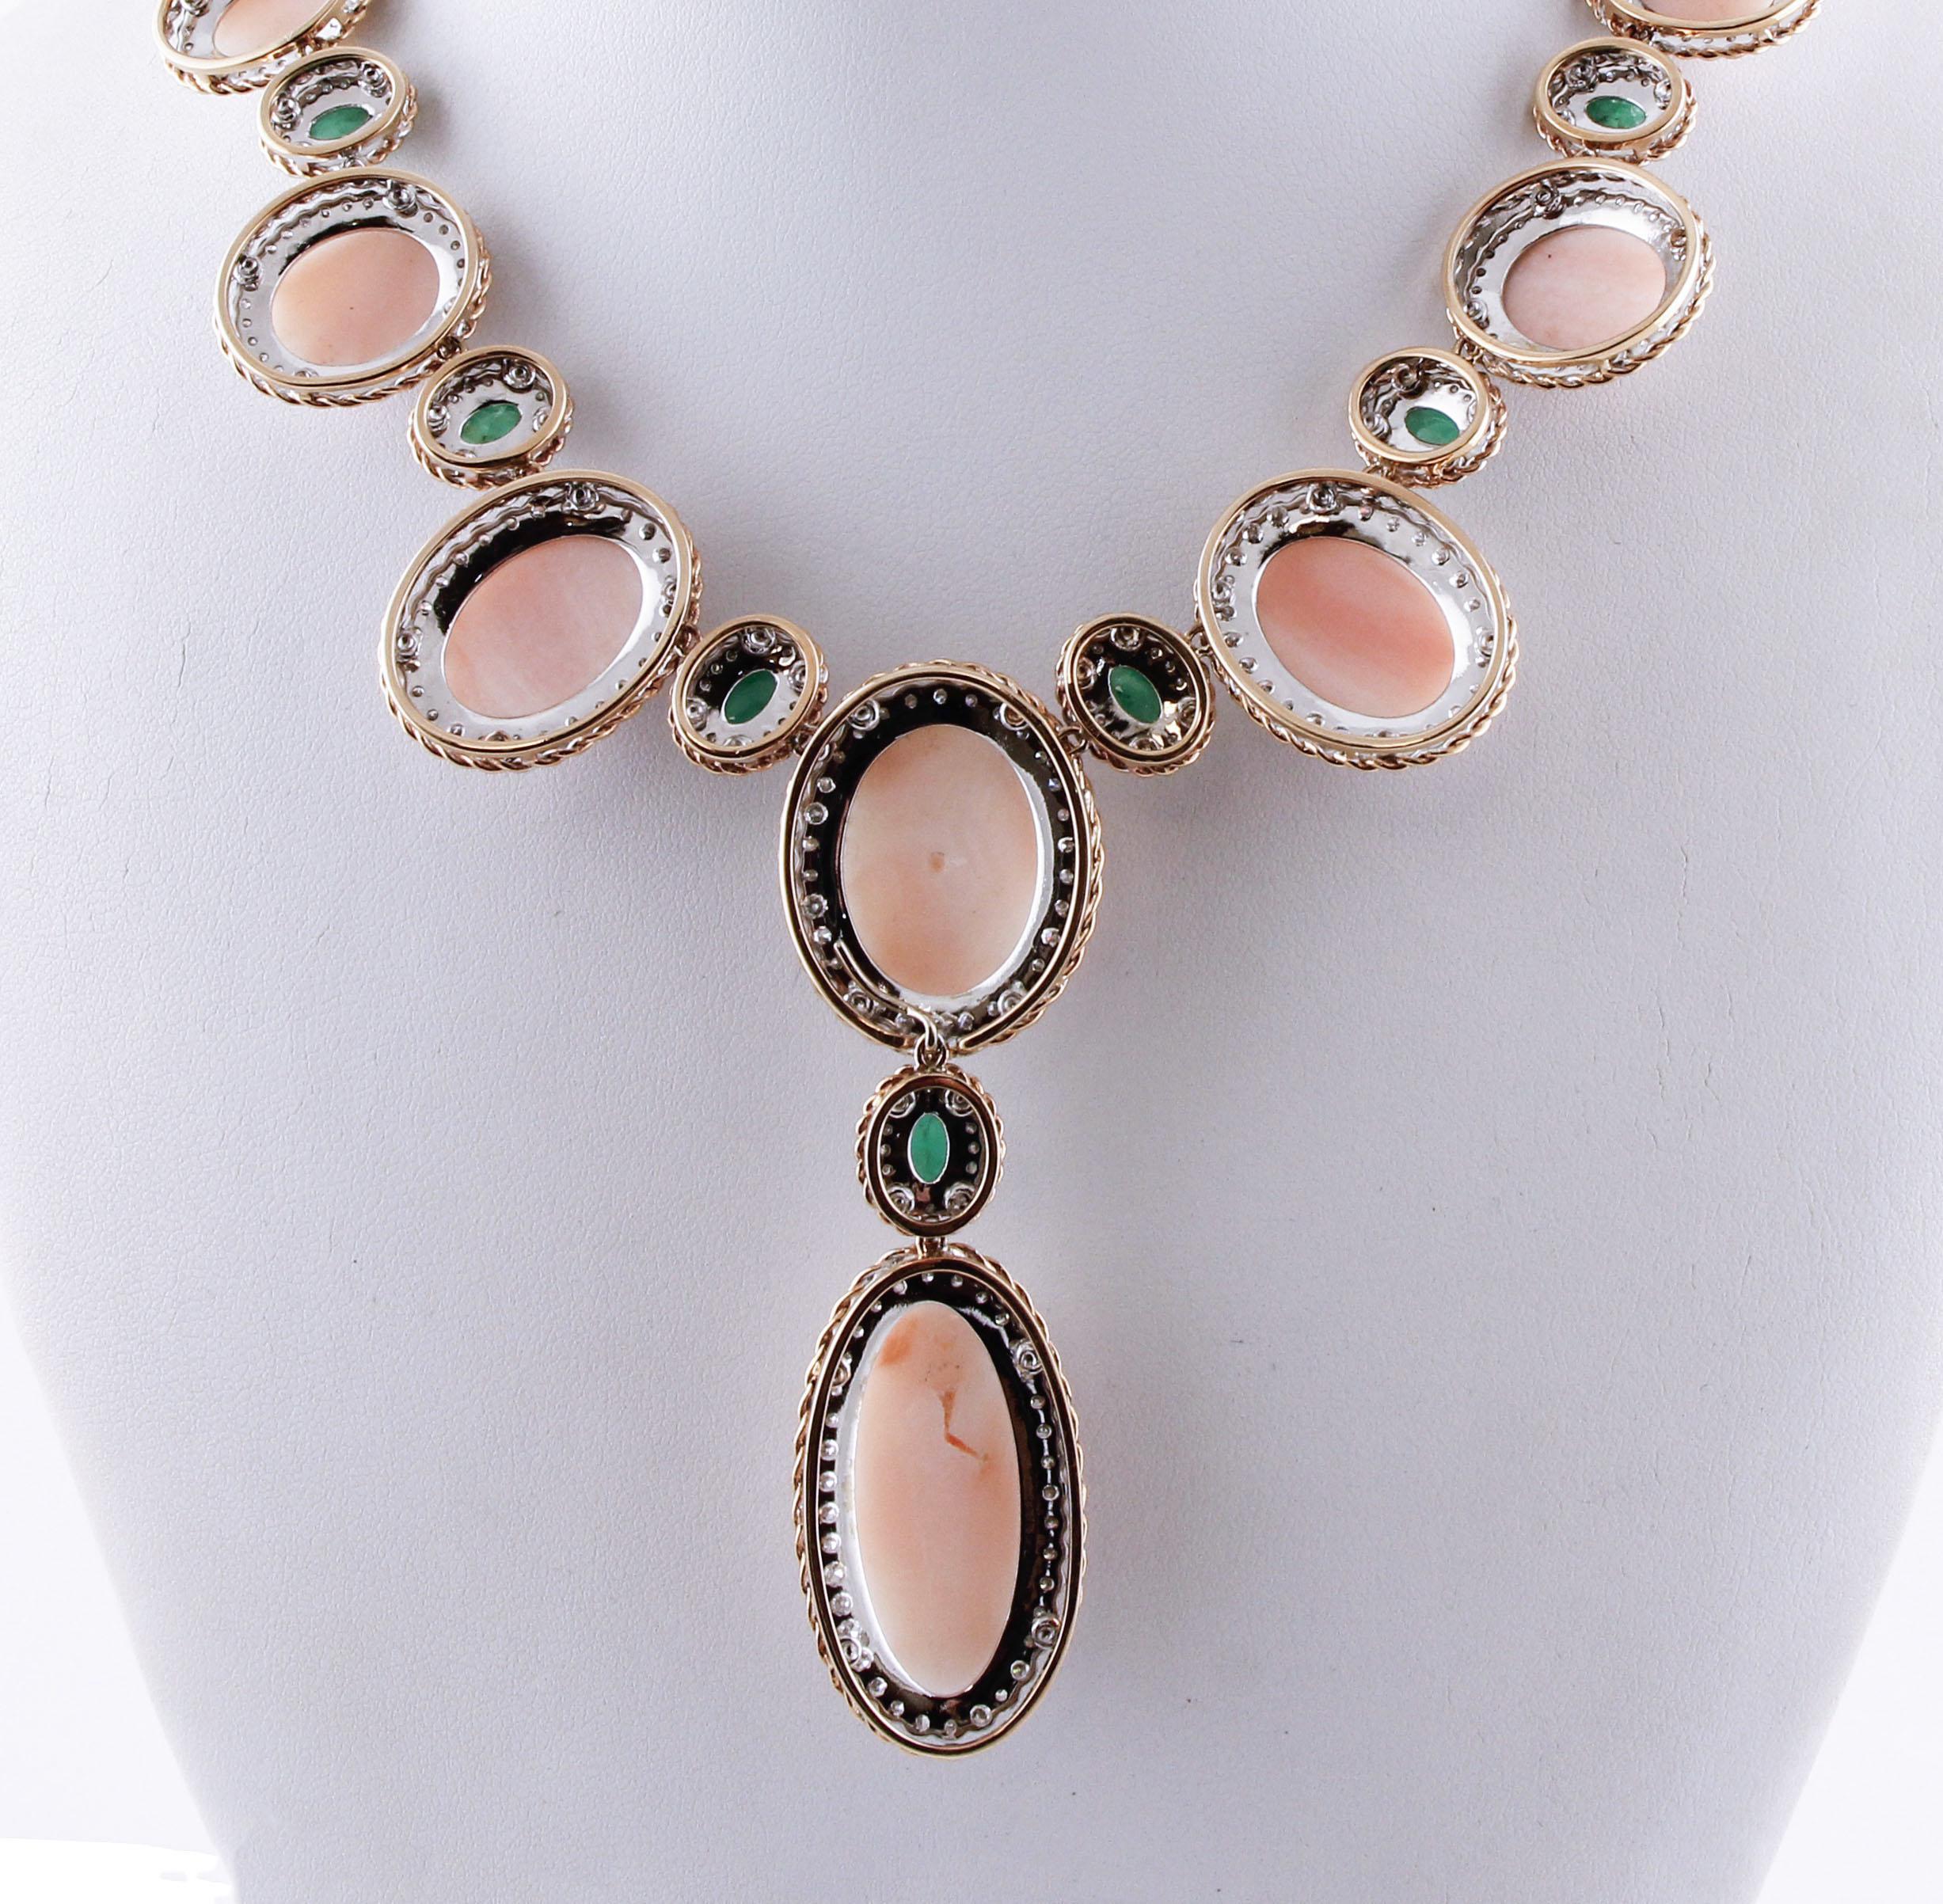 Retro Oval Shape Pink Coral, Diamonds, Emeralds, Rose White Gold Necklace